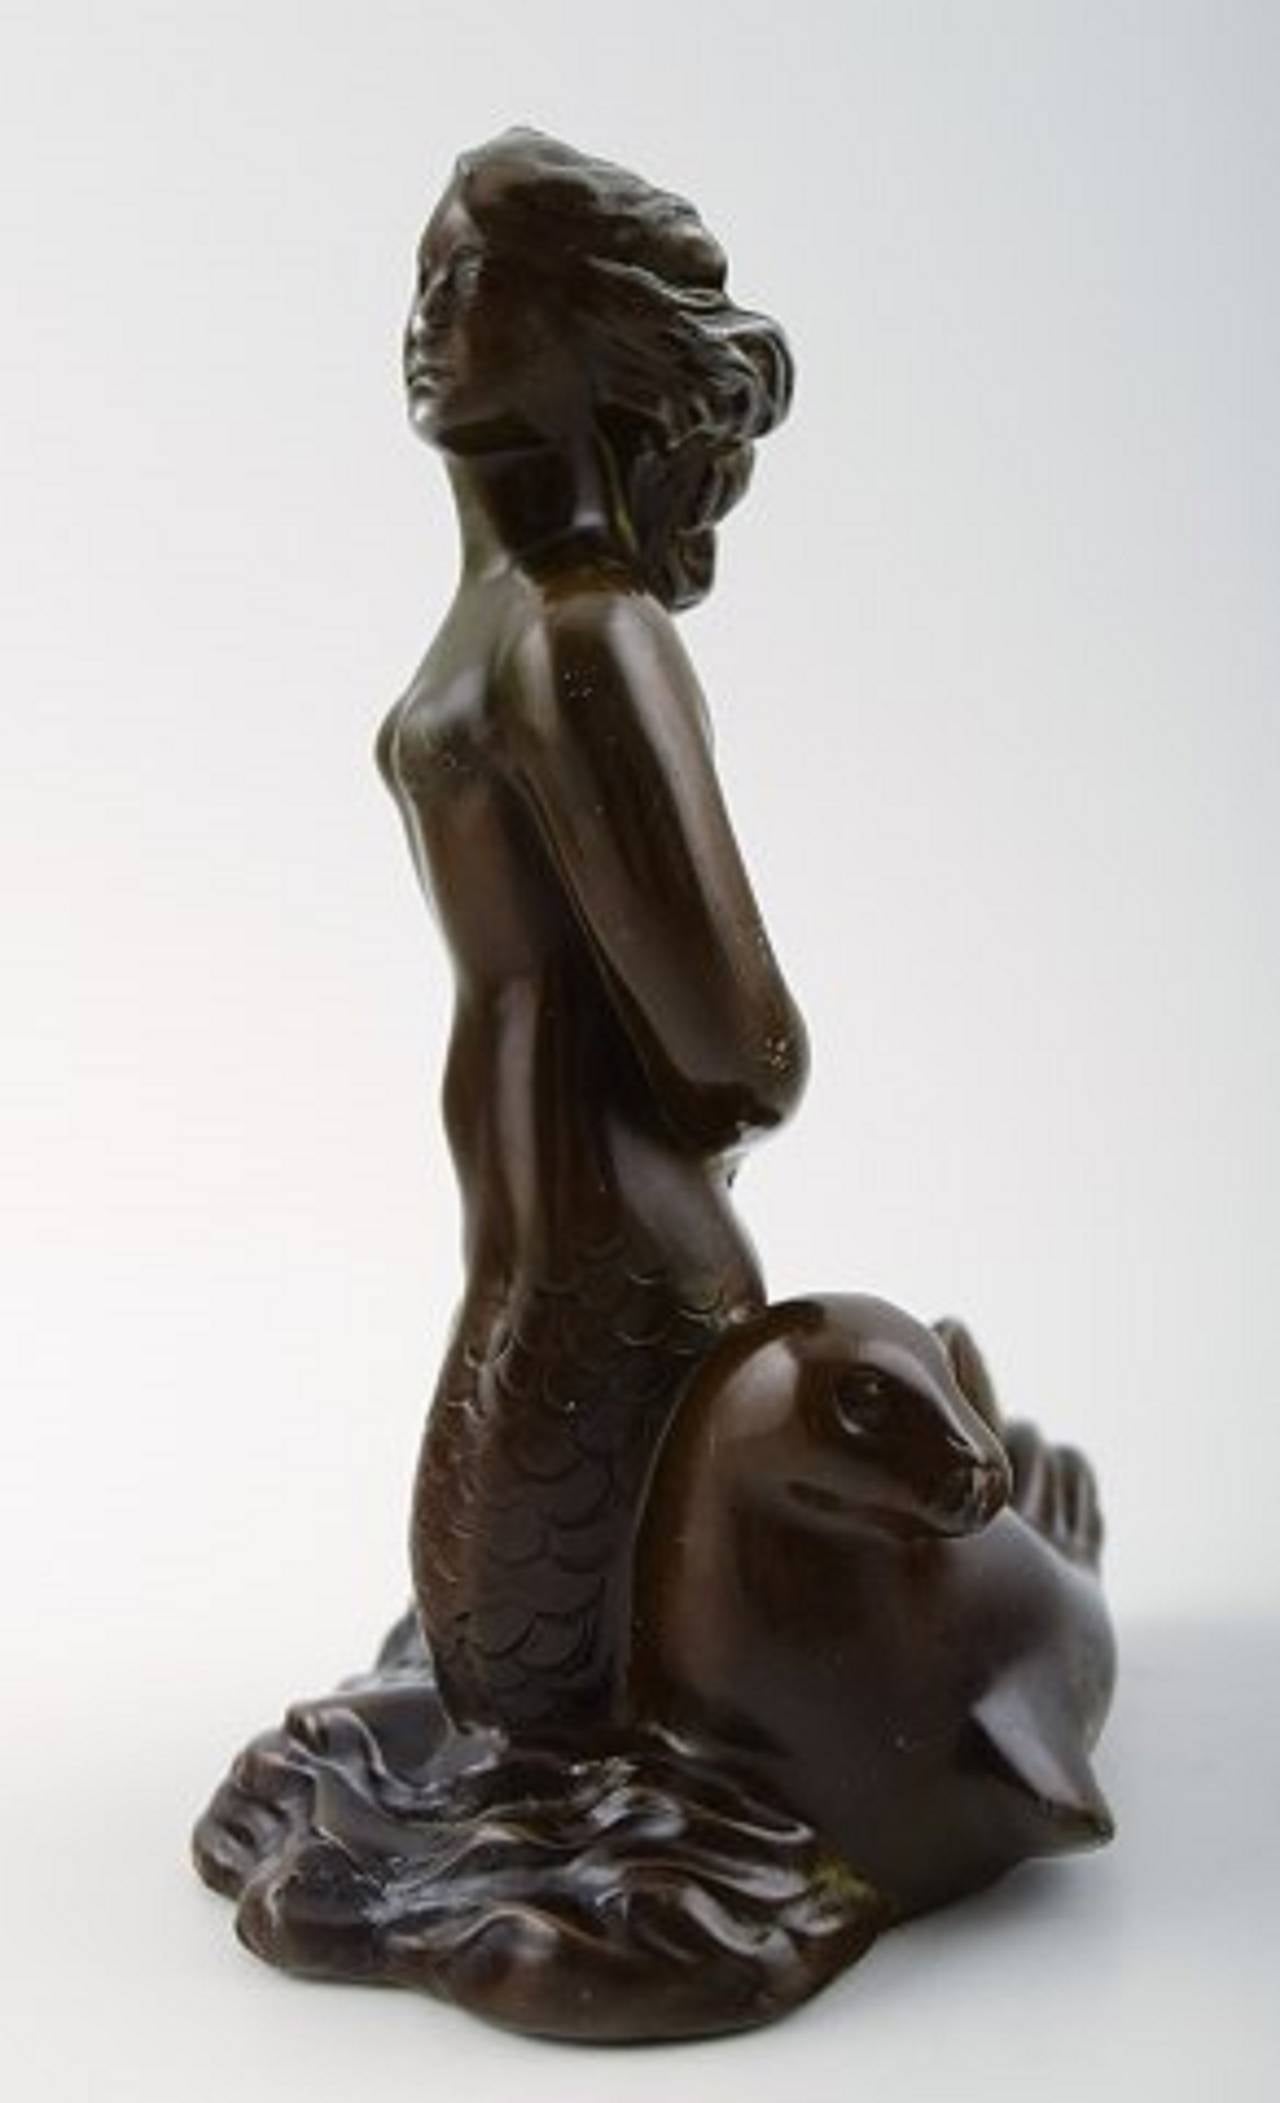 Figure of seated mermaid, designed by Just Andersen.
Denmark, 1940s.
The figure is made in metal and signed 'Just A'.
Number 1930.
Measures: Height 13.5 cm.
In good condition, a little wear.